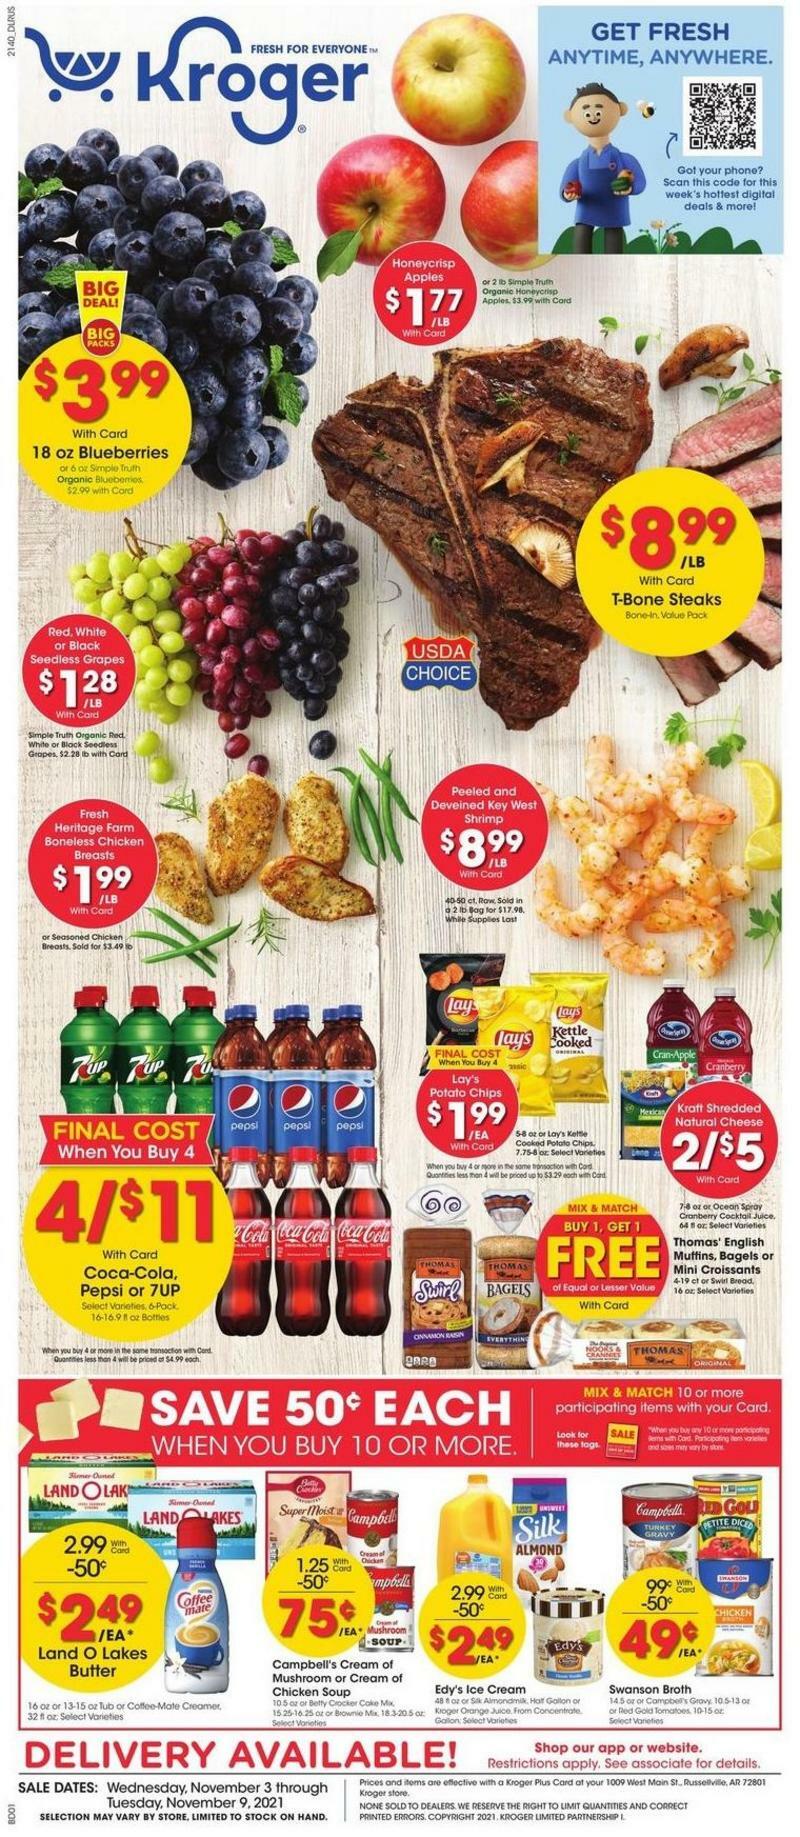 Kroger Weekly Ad from November 3